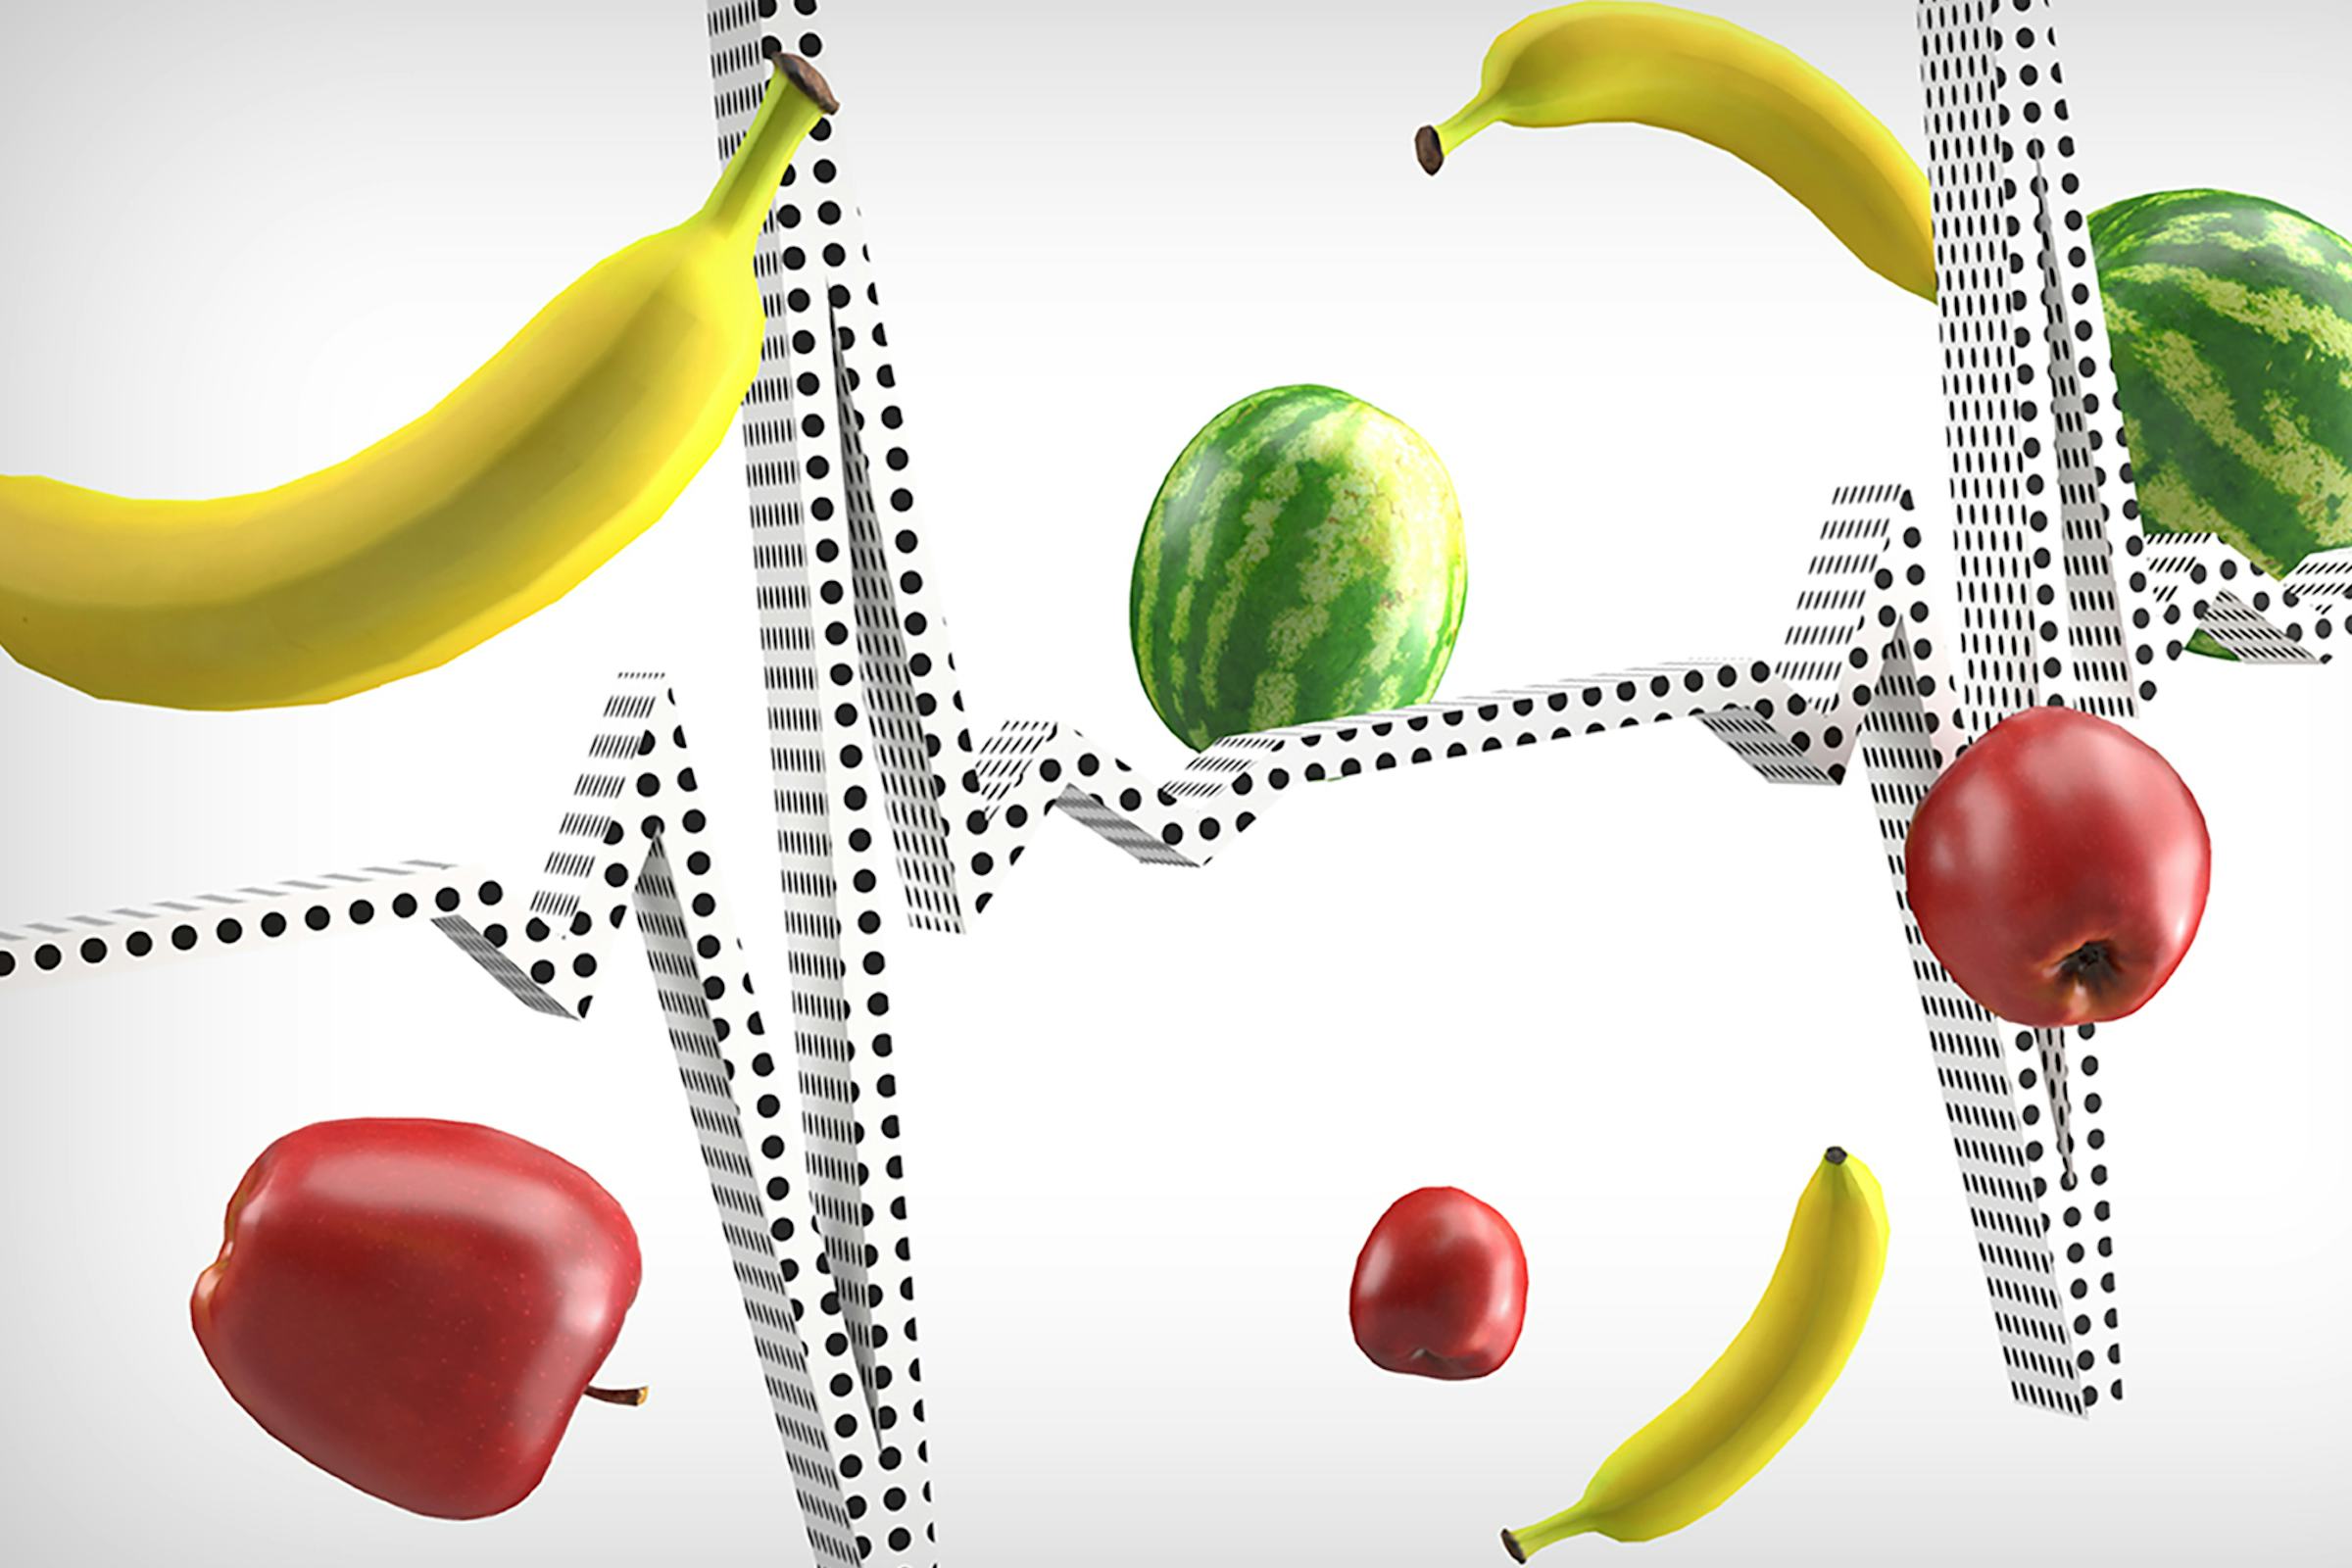 A line indicating a heartbeat moves through a field of floating fruits